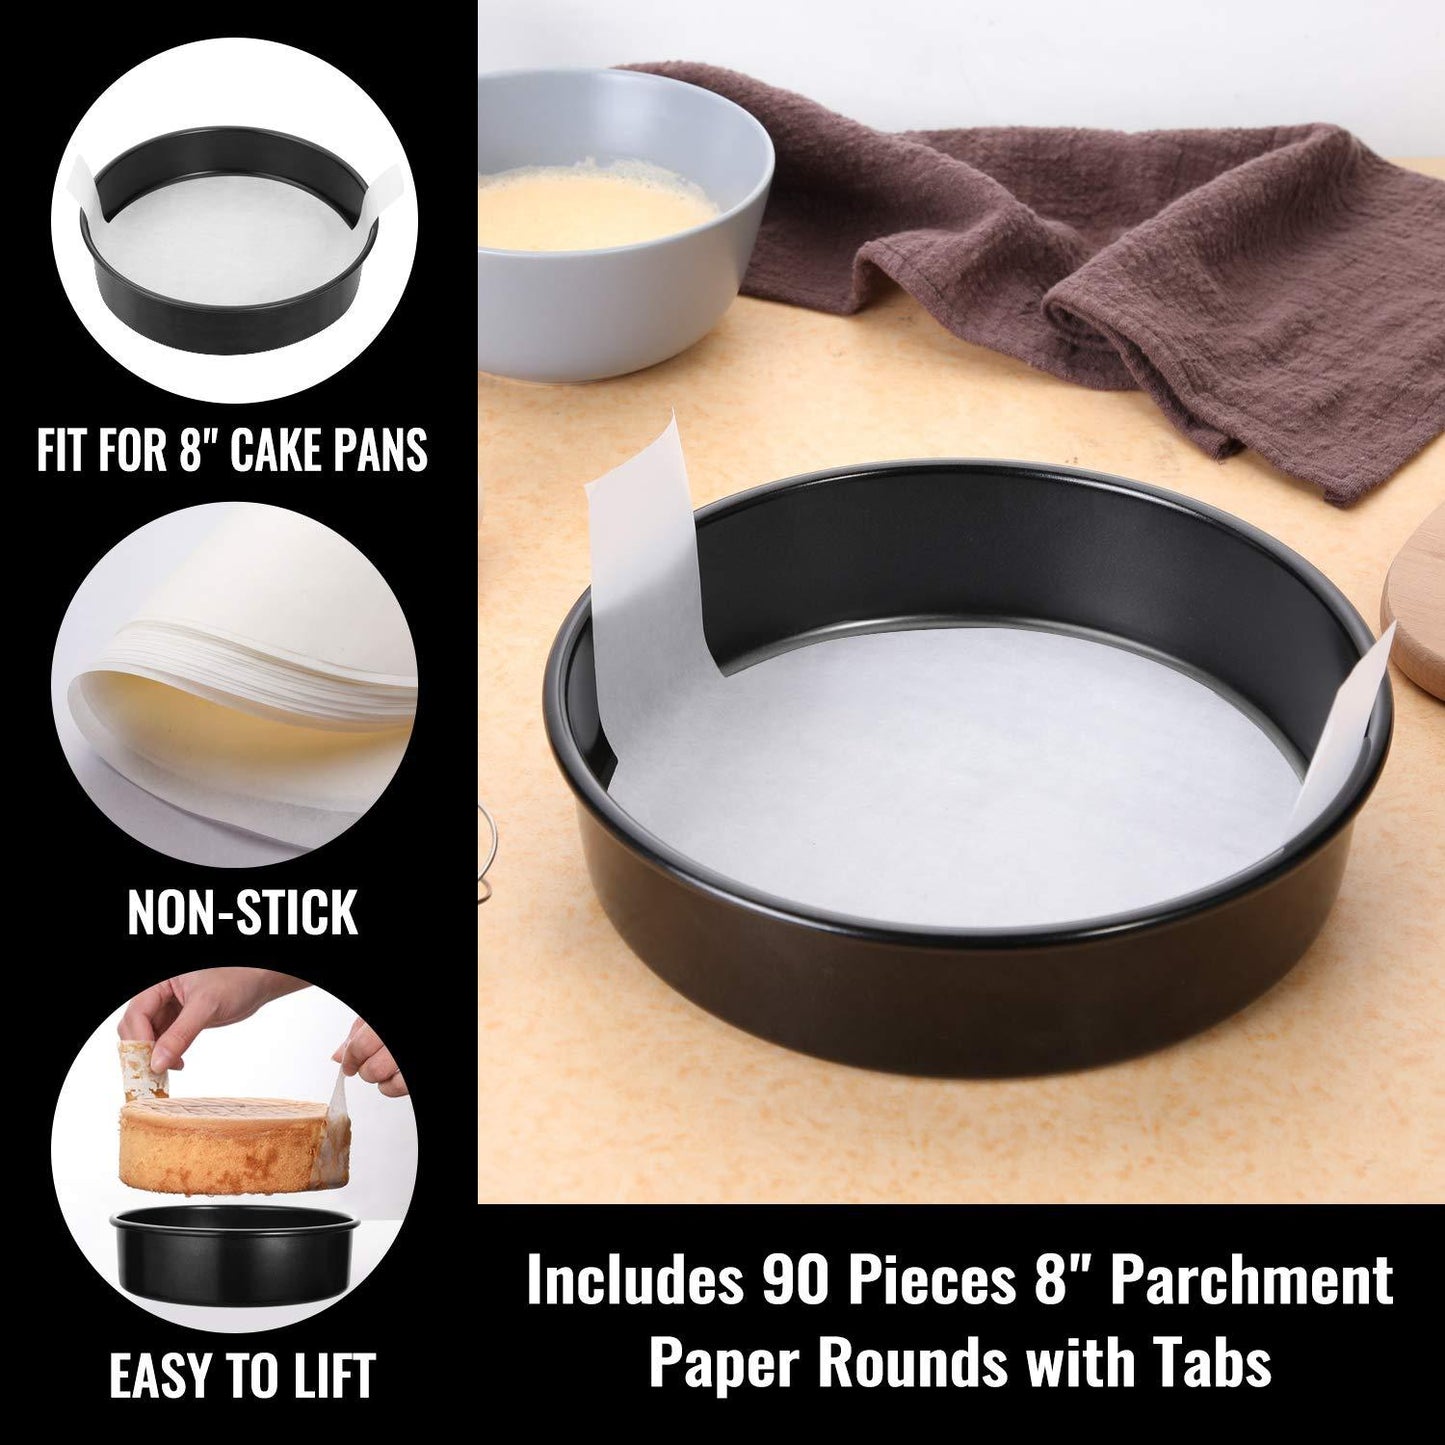 HIWARE 8-Inch Round Cake Pan Set of 3, Nonstick Baking Cake Pans with 90 Pieces Parchment Paper, Dishwasher Safe - CookCave